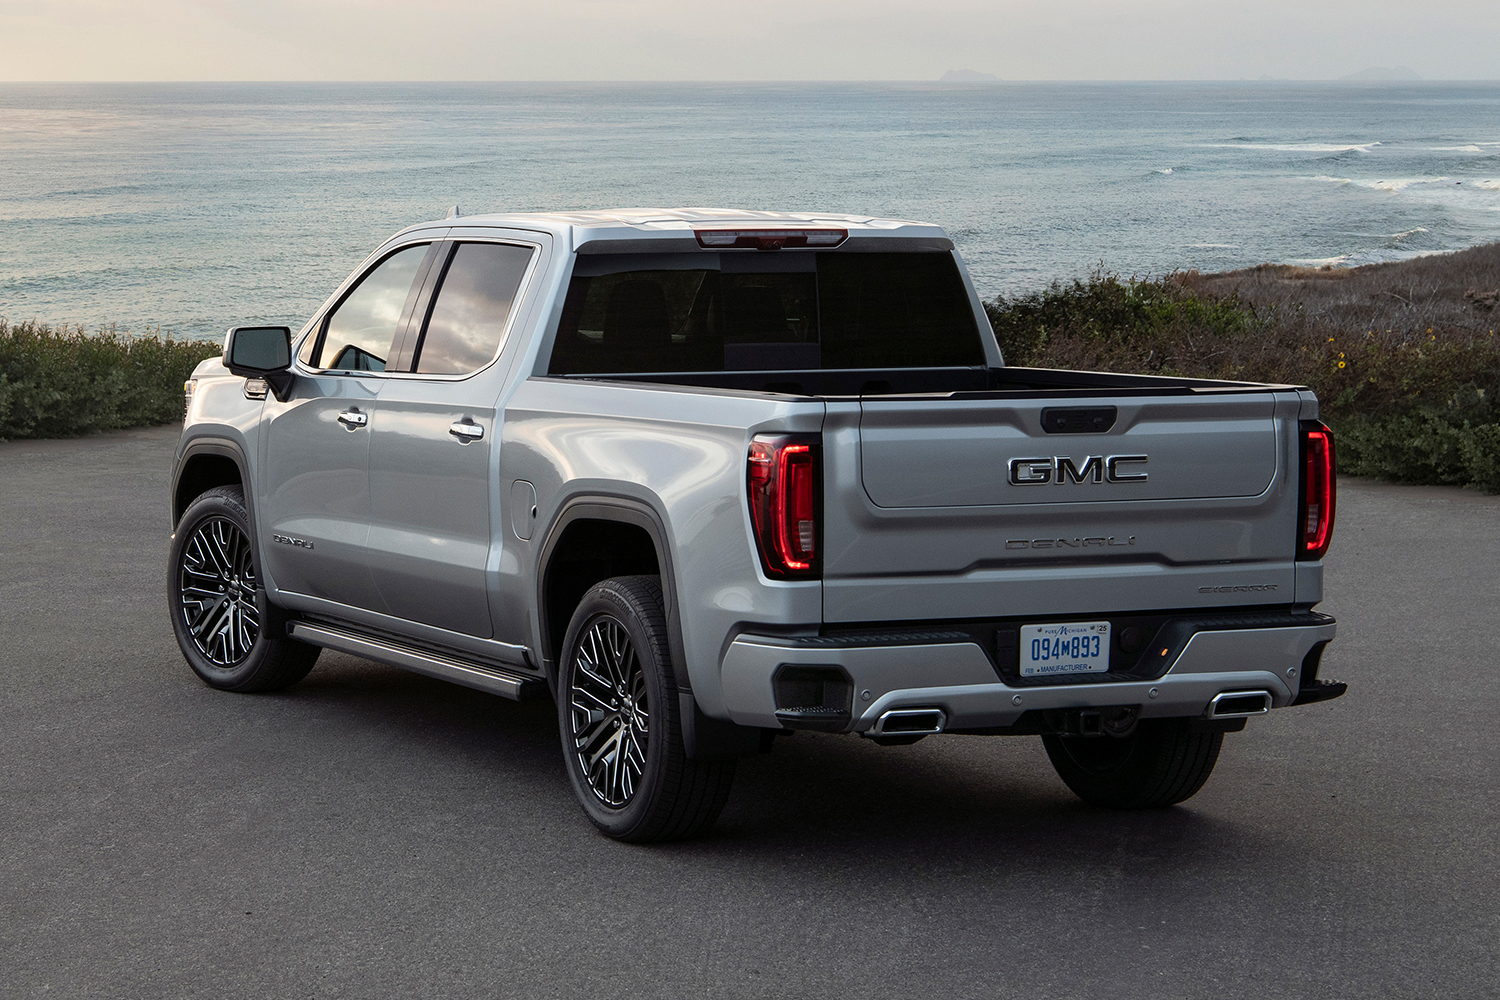 The truck bed for the GMC Sierra Denali Ultimate pickup truck